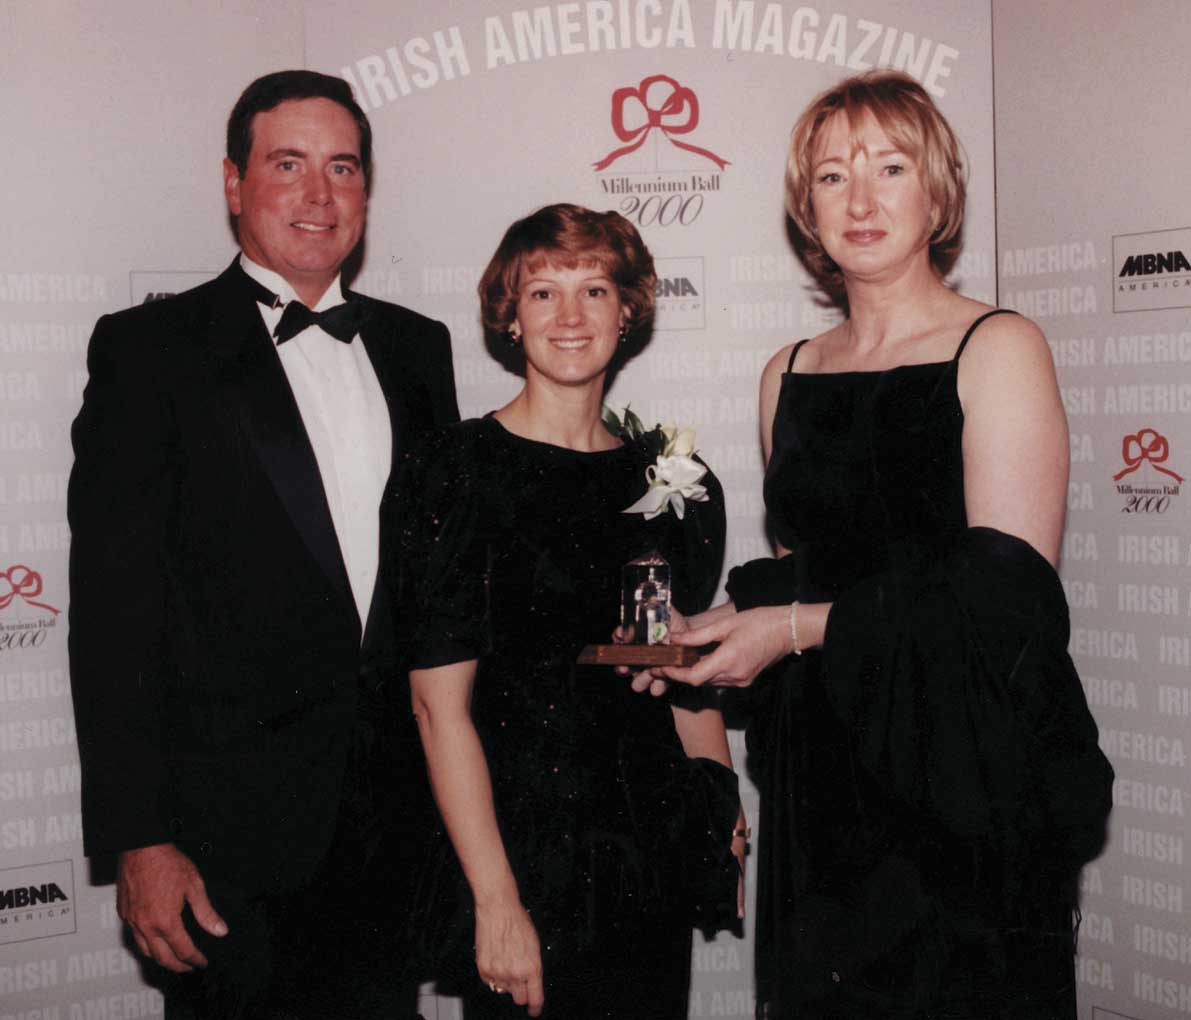 Eileen Collins, center, with her husband Pat Youngs, left, and  Patricia Harty at the 2000 Irish America Top 100 Awards.